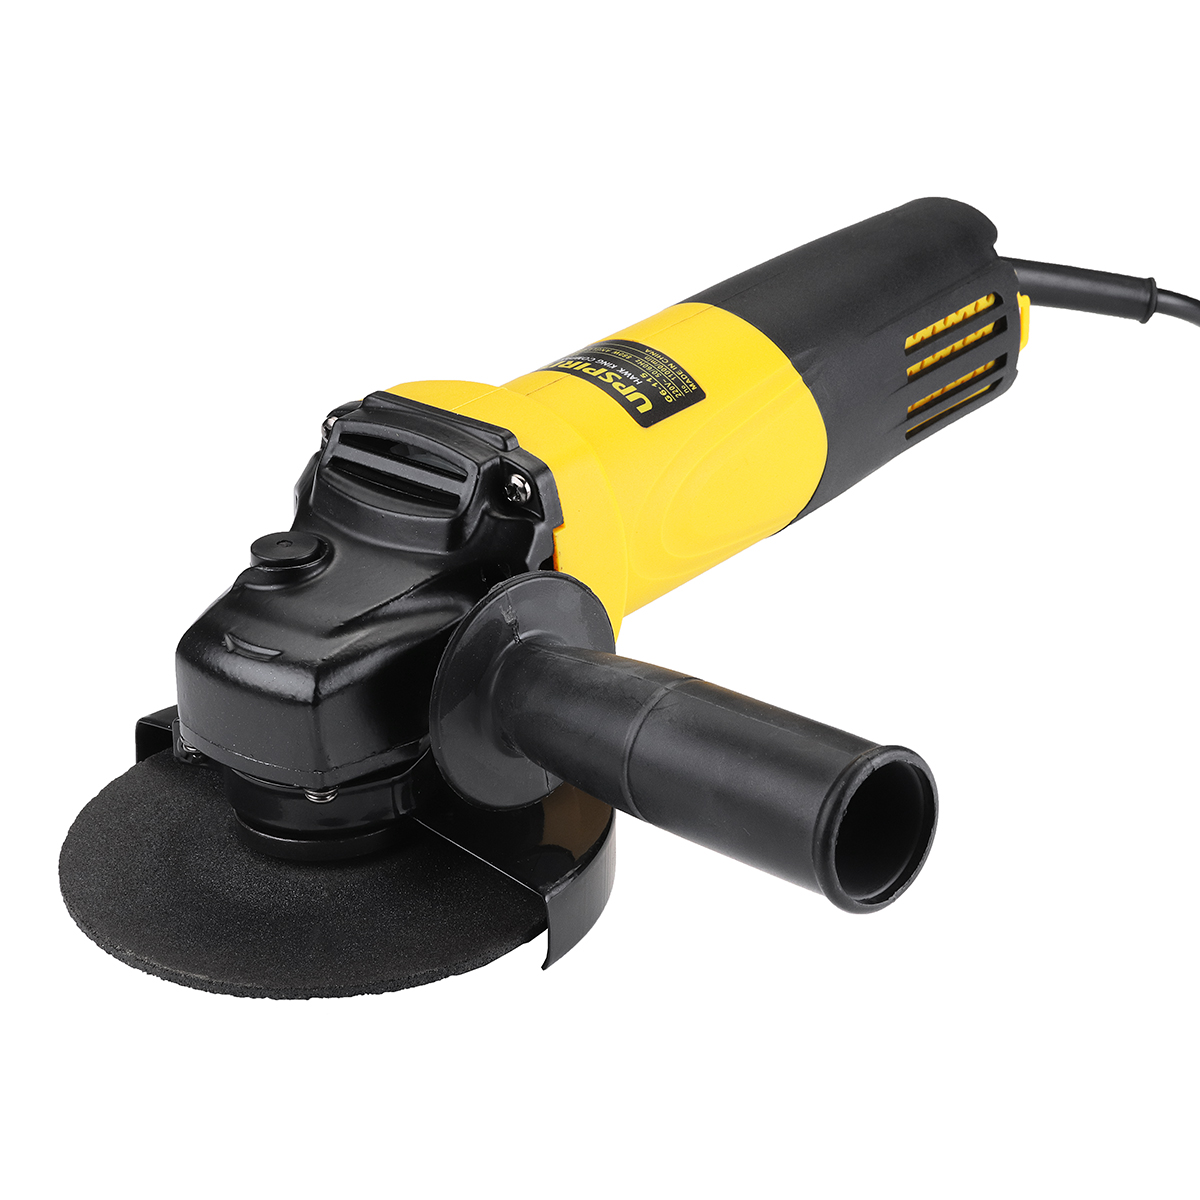 AC220V-880W-Electric-Angle-Grinder-Heavy-Duty-Sanding-Cutting-Grinding-Machine-Tool-115mm-1405035-6